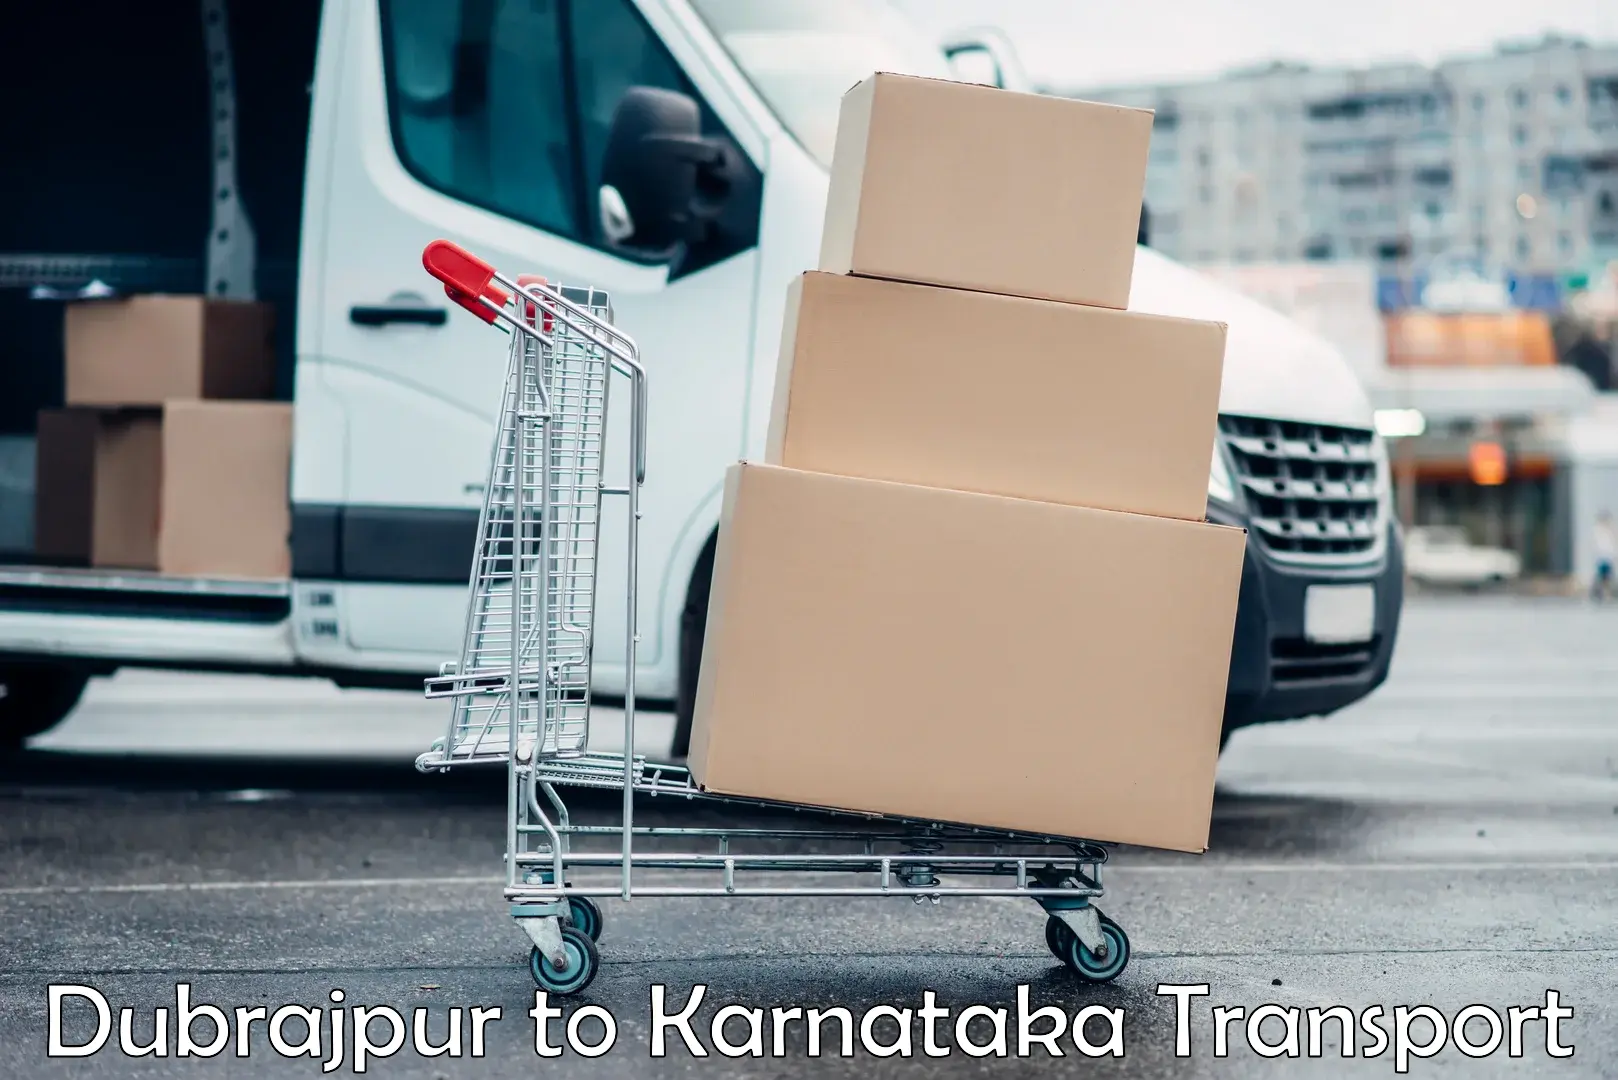 Daily parcel service transport Dubrajpur to Bengaluru